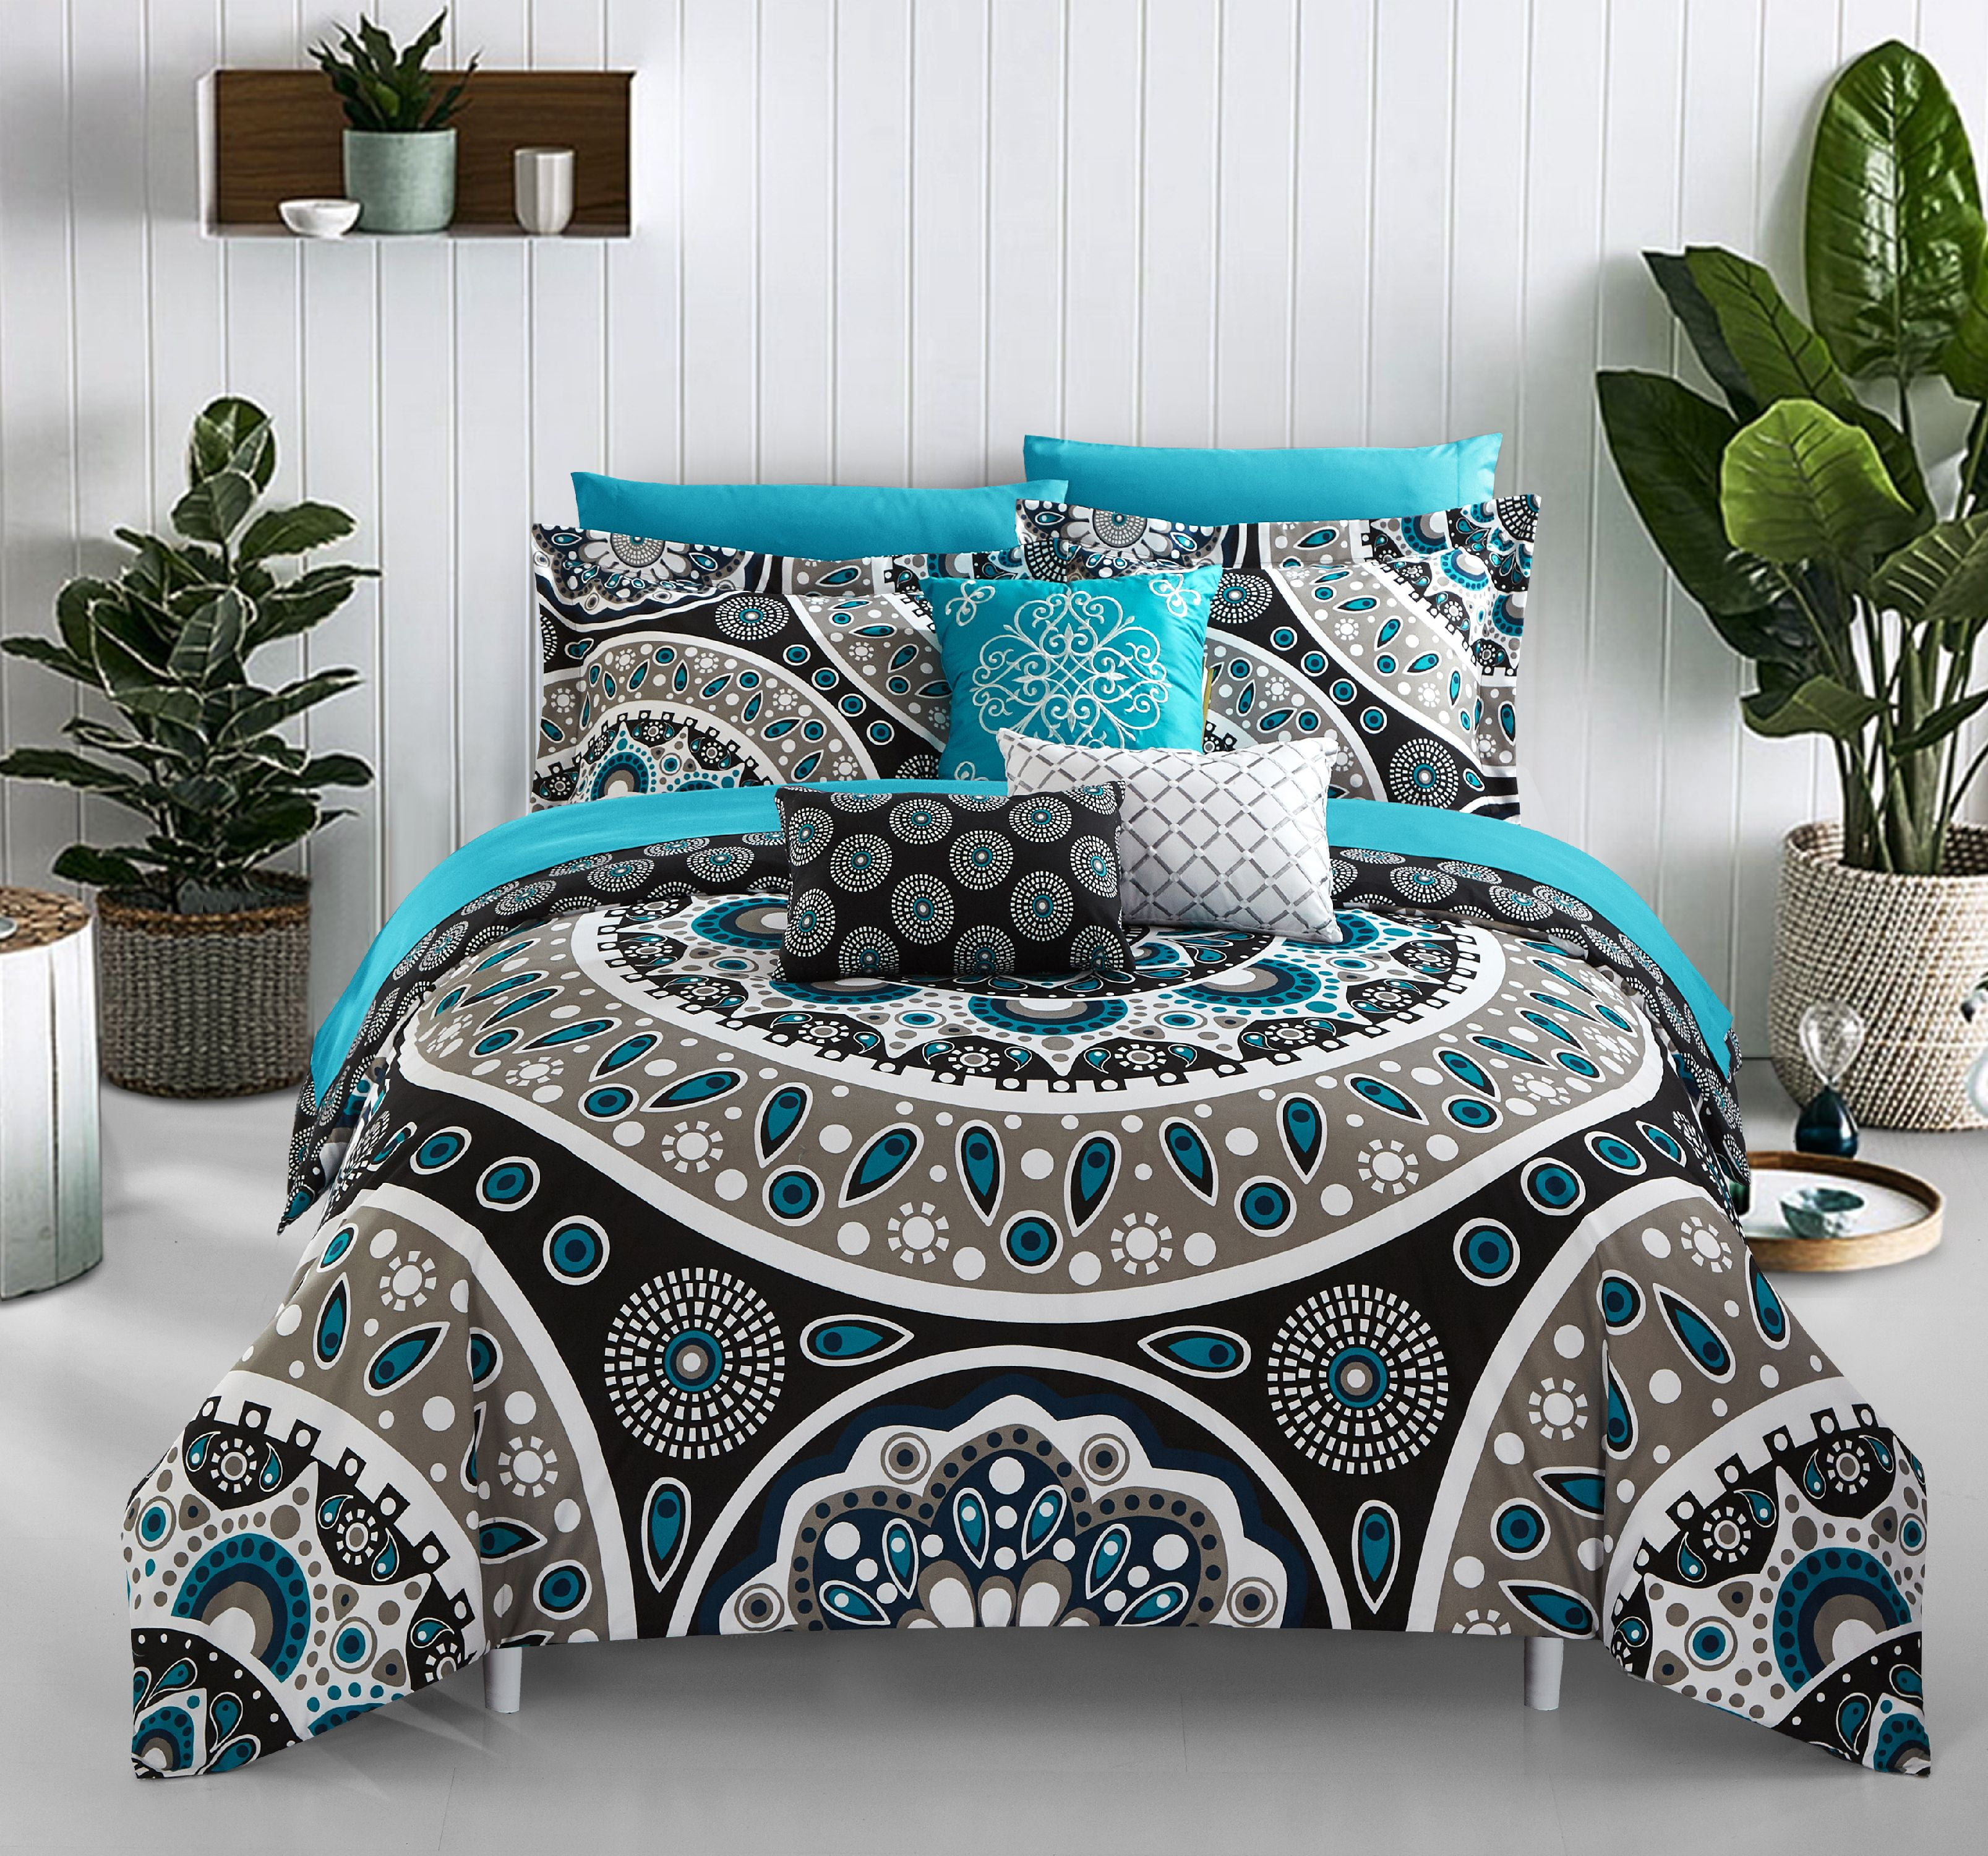 New 10 Piece Comforter Set Bed in a Bag Bedding Sheets King Size Bedspread Teal 